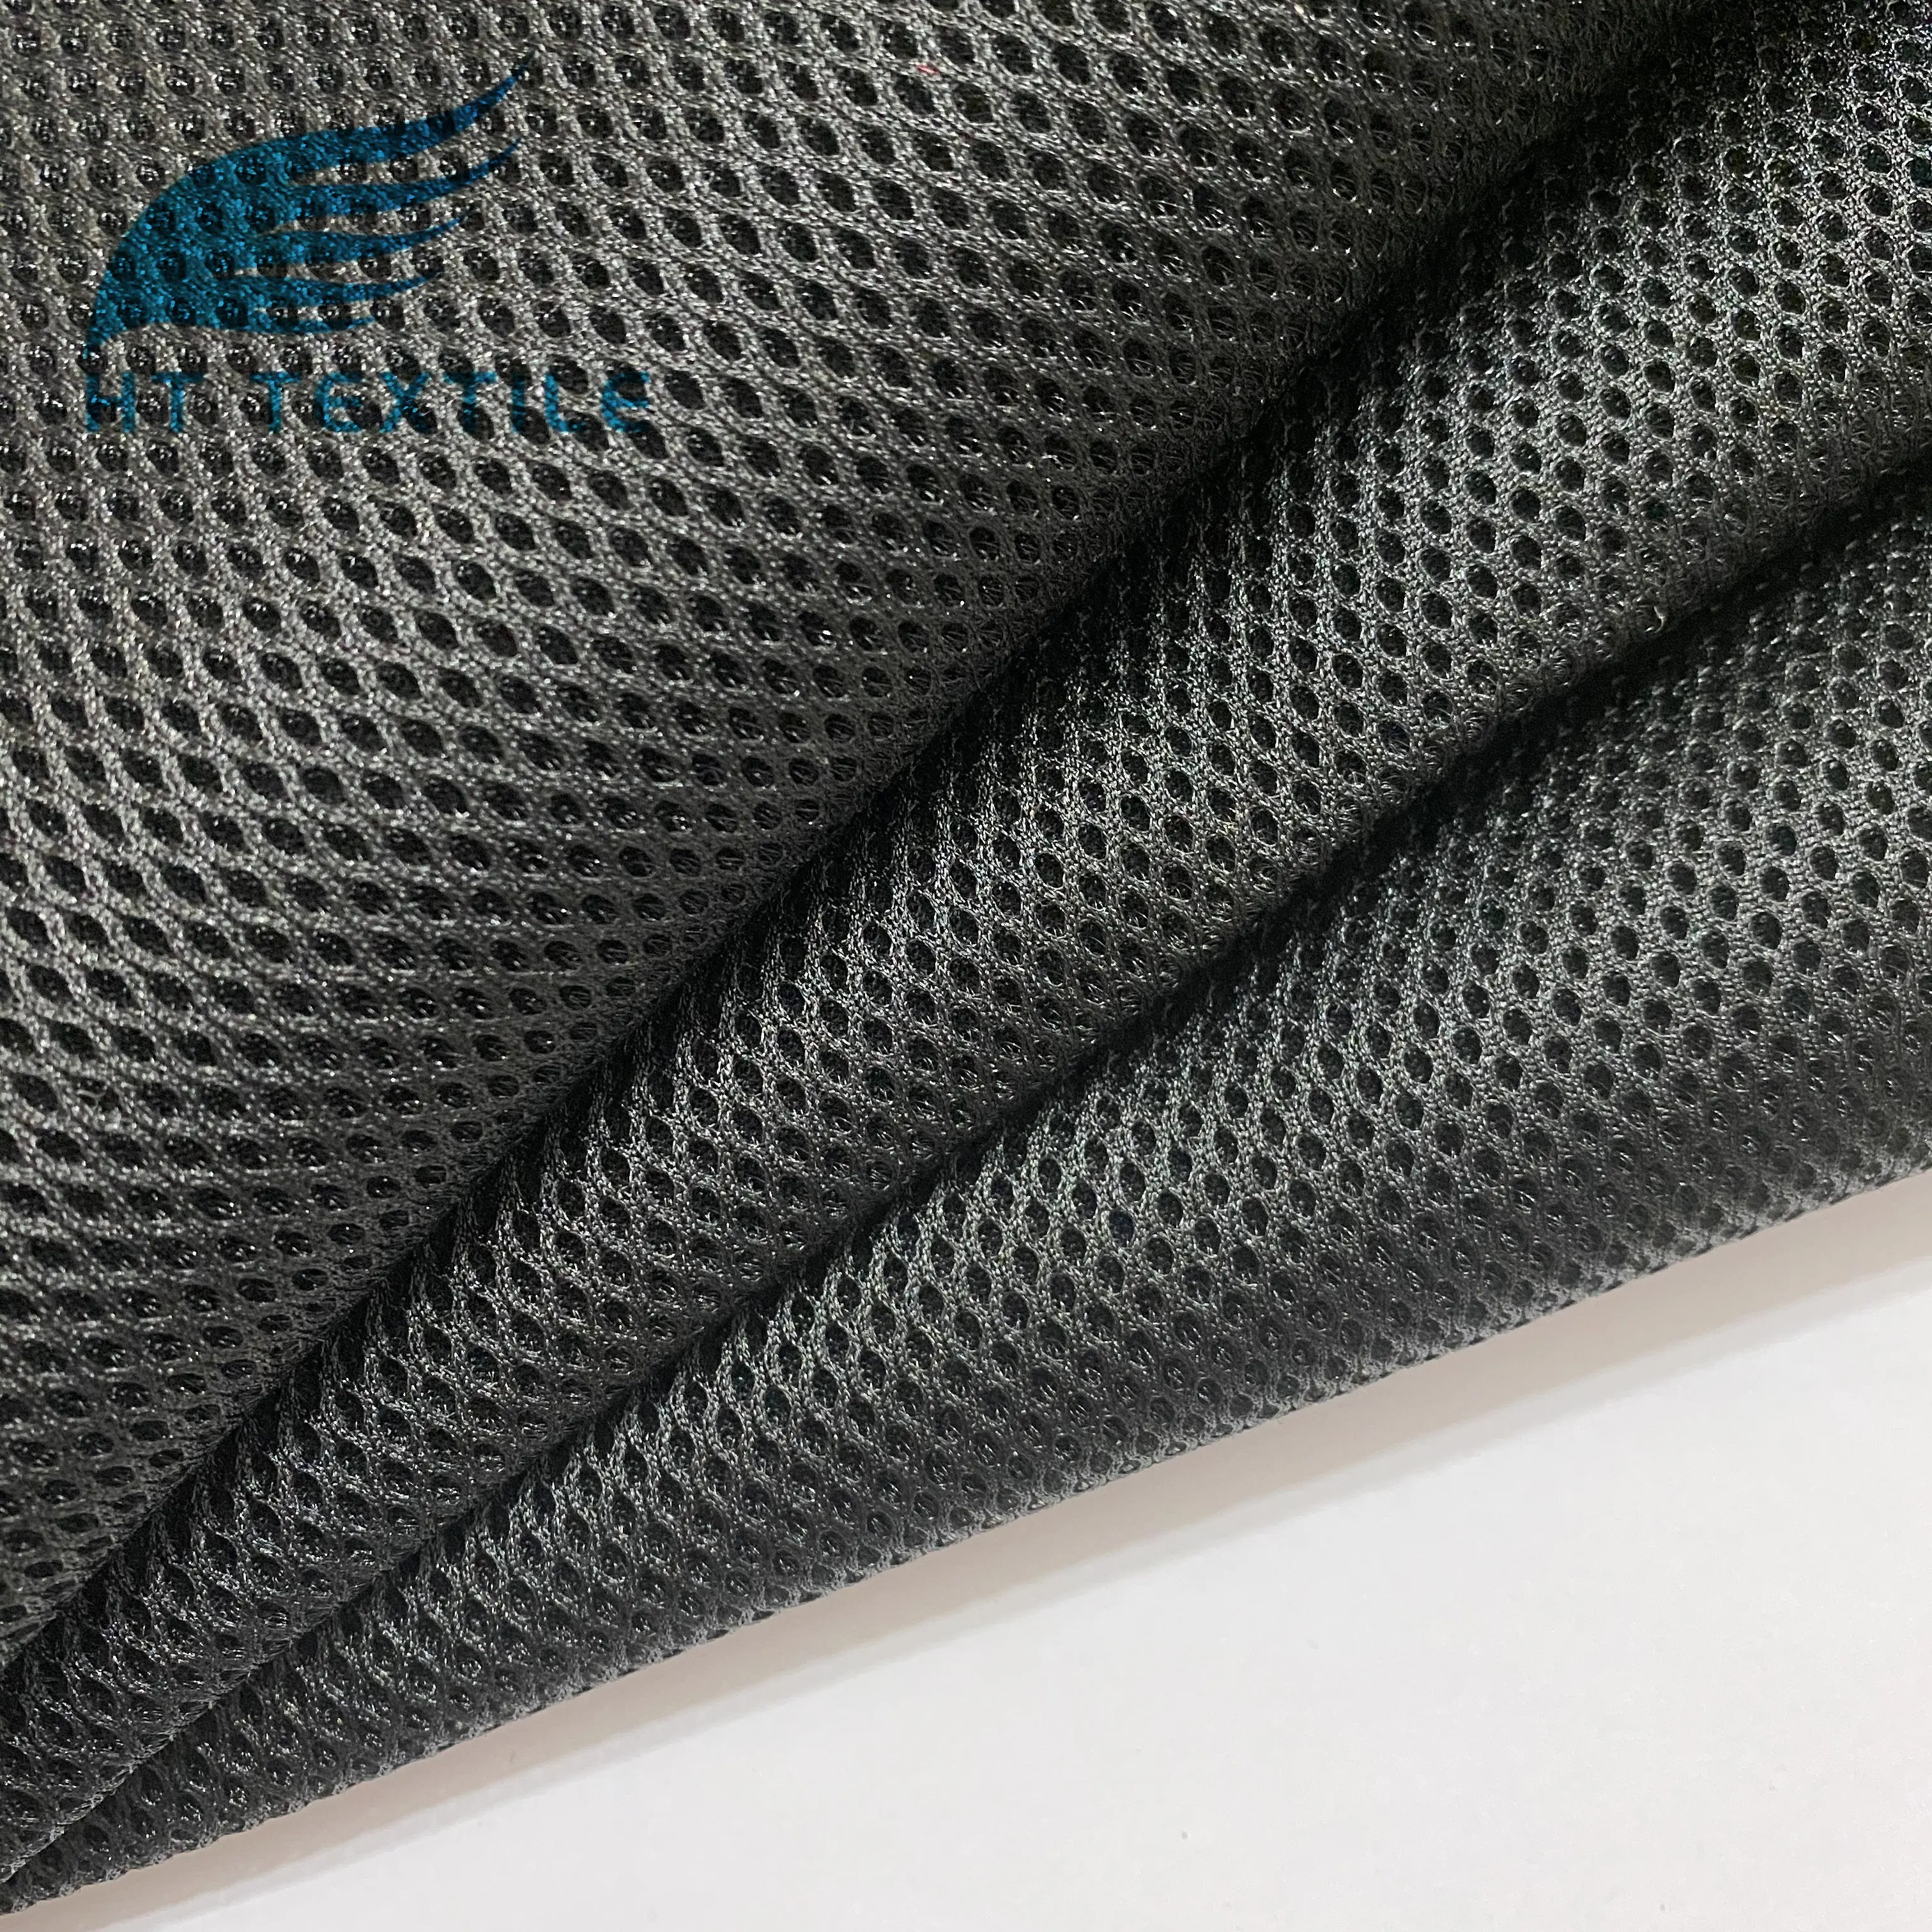 China manufacturer 3D spacer polyester thick air mesh scuba sandwich fabric for shoes hats and office chair